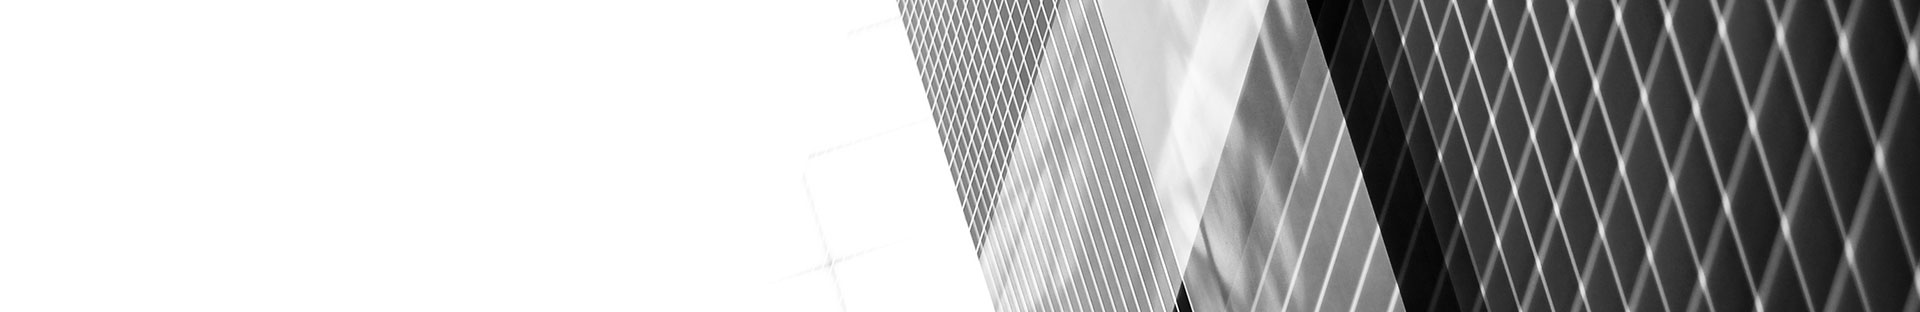 close up of a black and white building